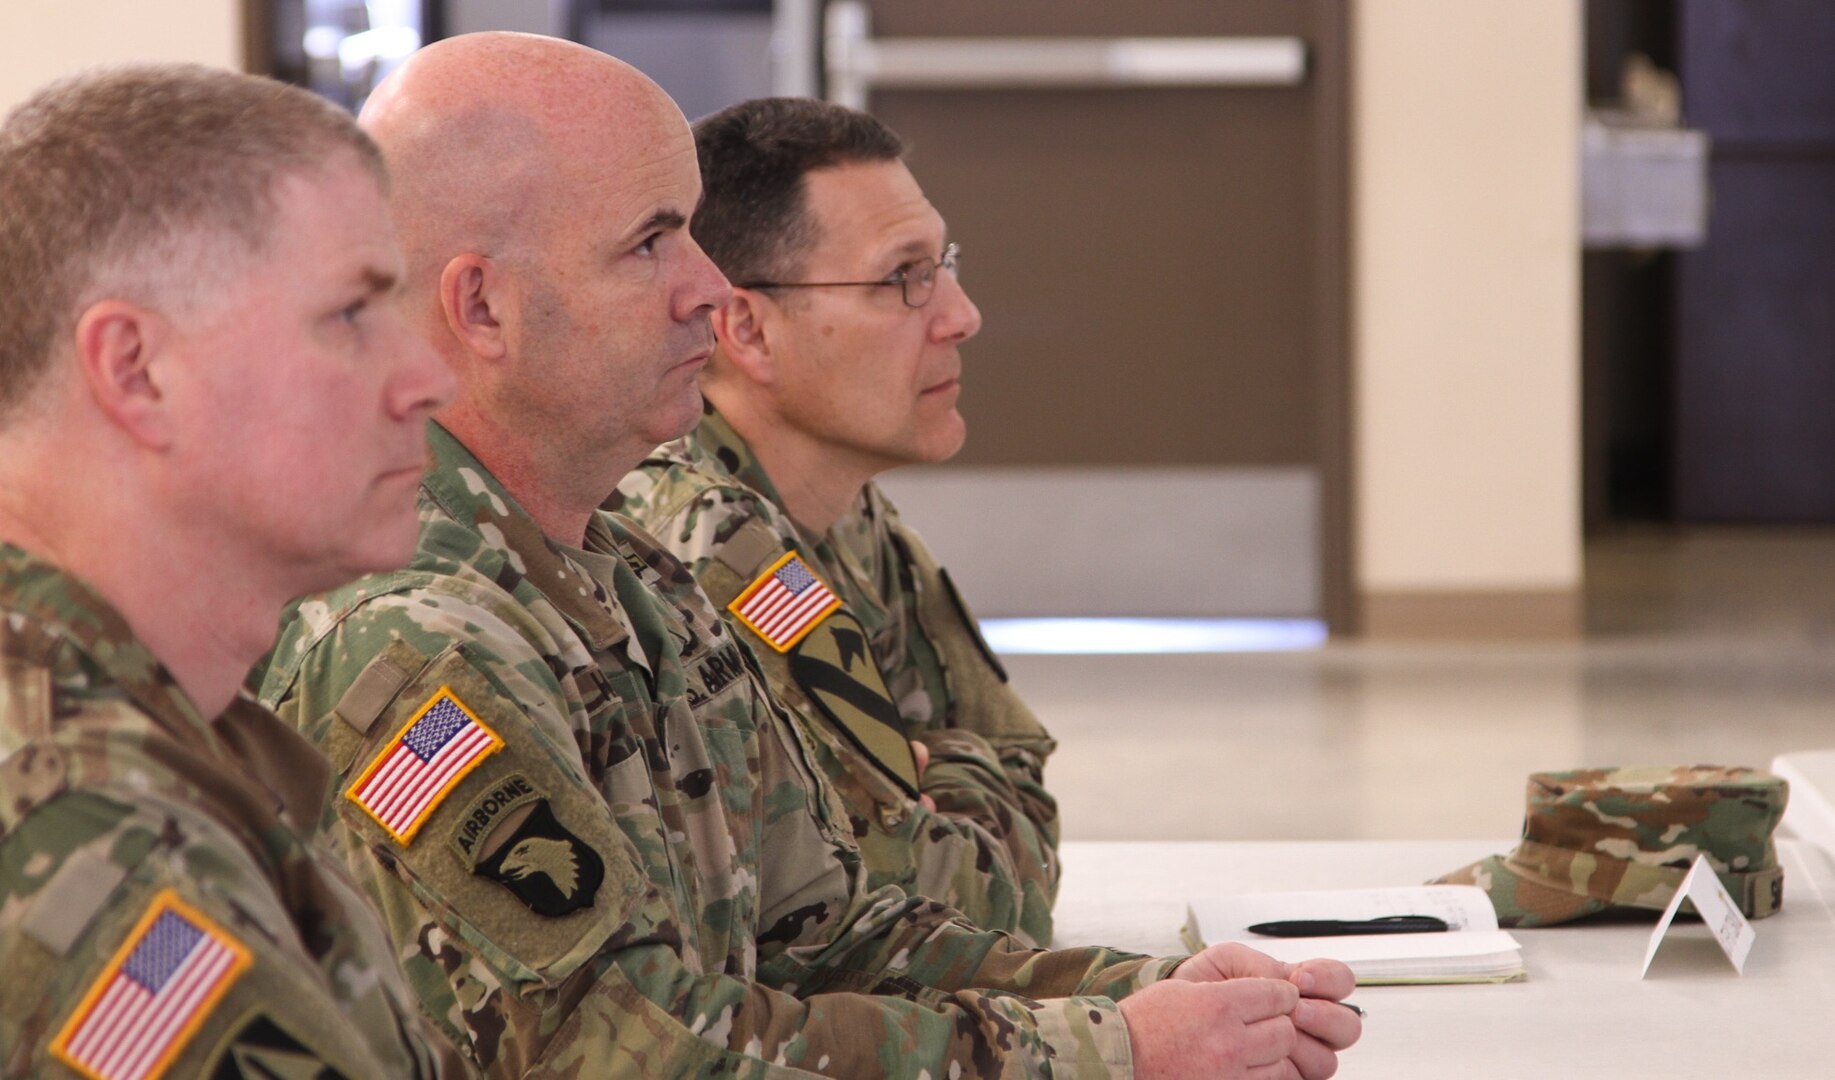 Army Brig. Gen. John Hashem, the deputy commanding general of U.S. Army North (ARNORTH), in Fort Sam Houston, San Antonio, Texas and the exercise control deputy director for exercise Vibrant Response 17, attends a briefing with Soldiers with the Indiana Army National Guard during Exercise Vibrant Response 17 at Camp Atterbury, Ind., on May 7, 2017. ARNORTH conducts the Vibrant Response training exercises to annually test the capability of federal response forces in order to meet the expectations of the nation.